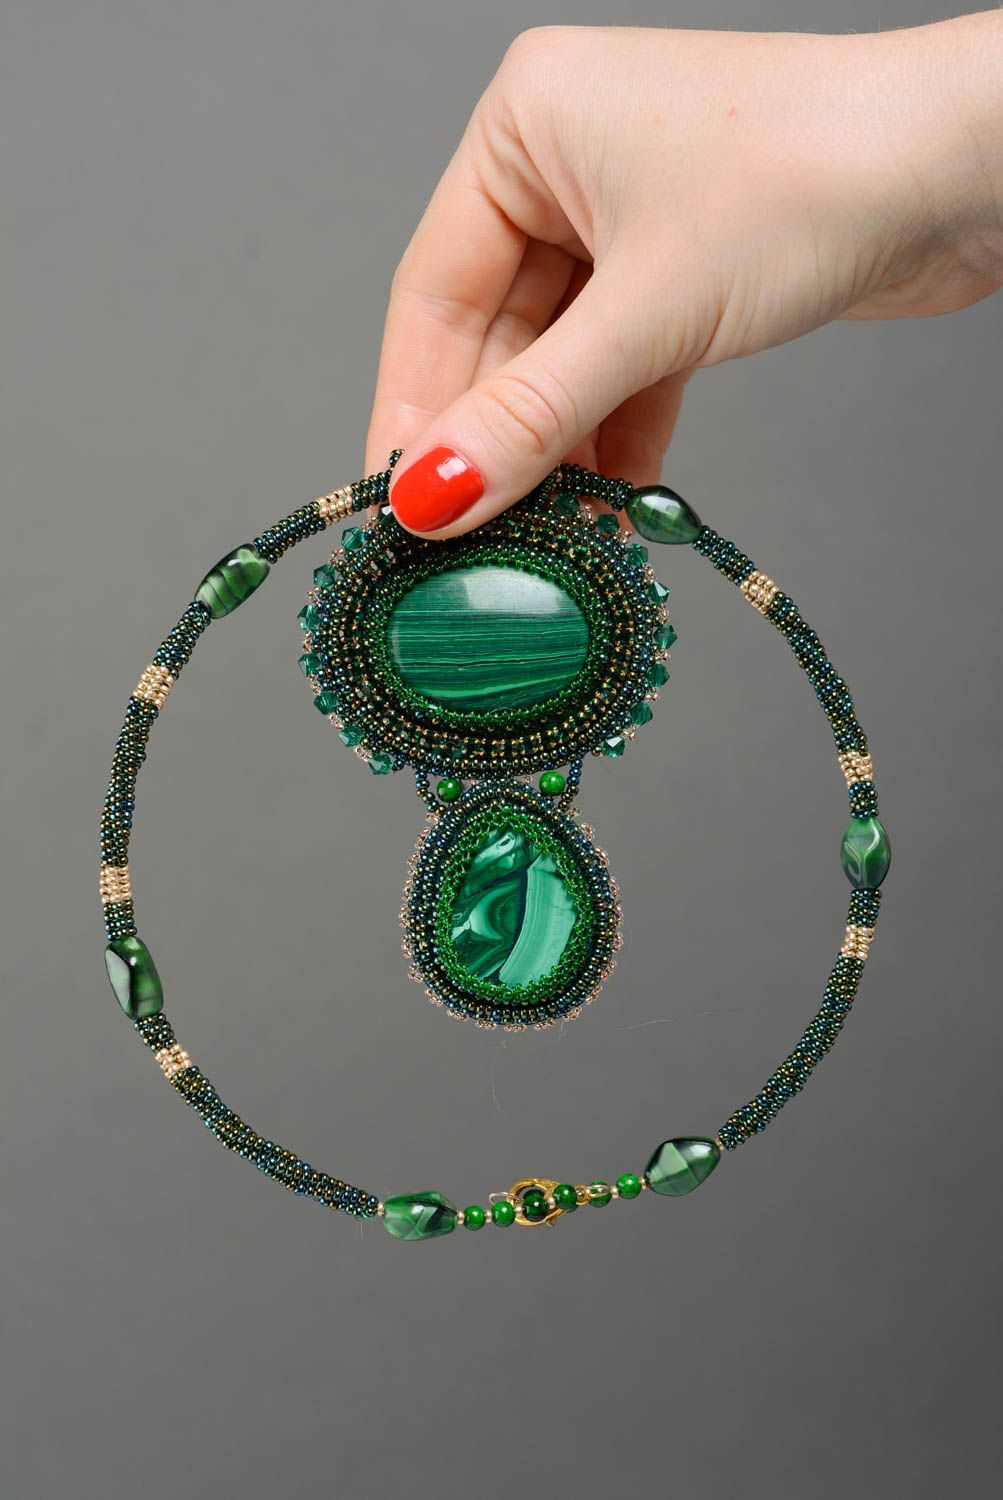 Handmade festive green bead embroidered pendant necklace with malachite stone photo 3